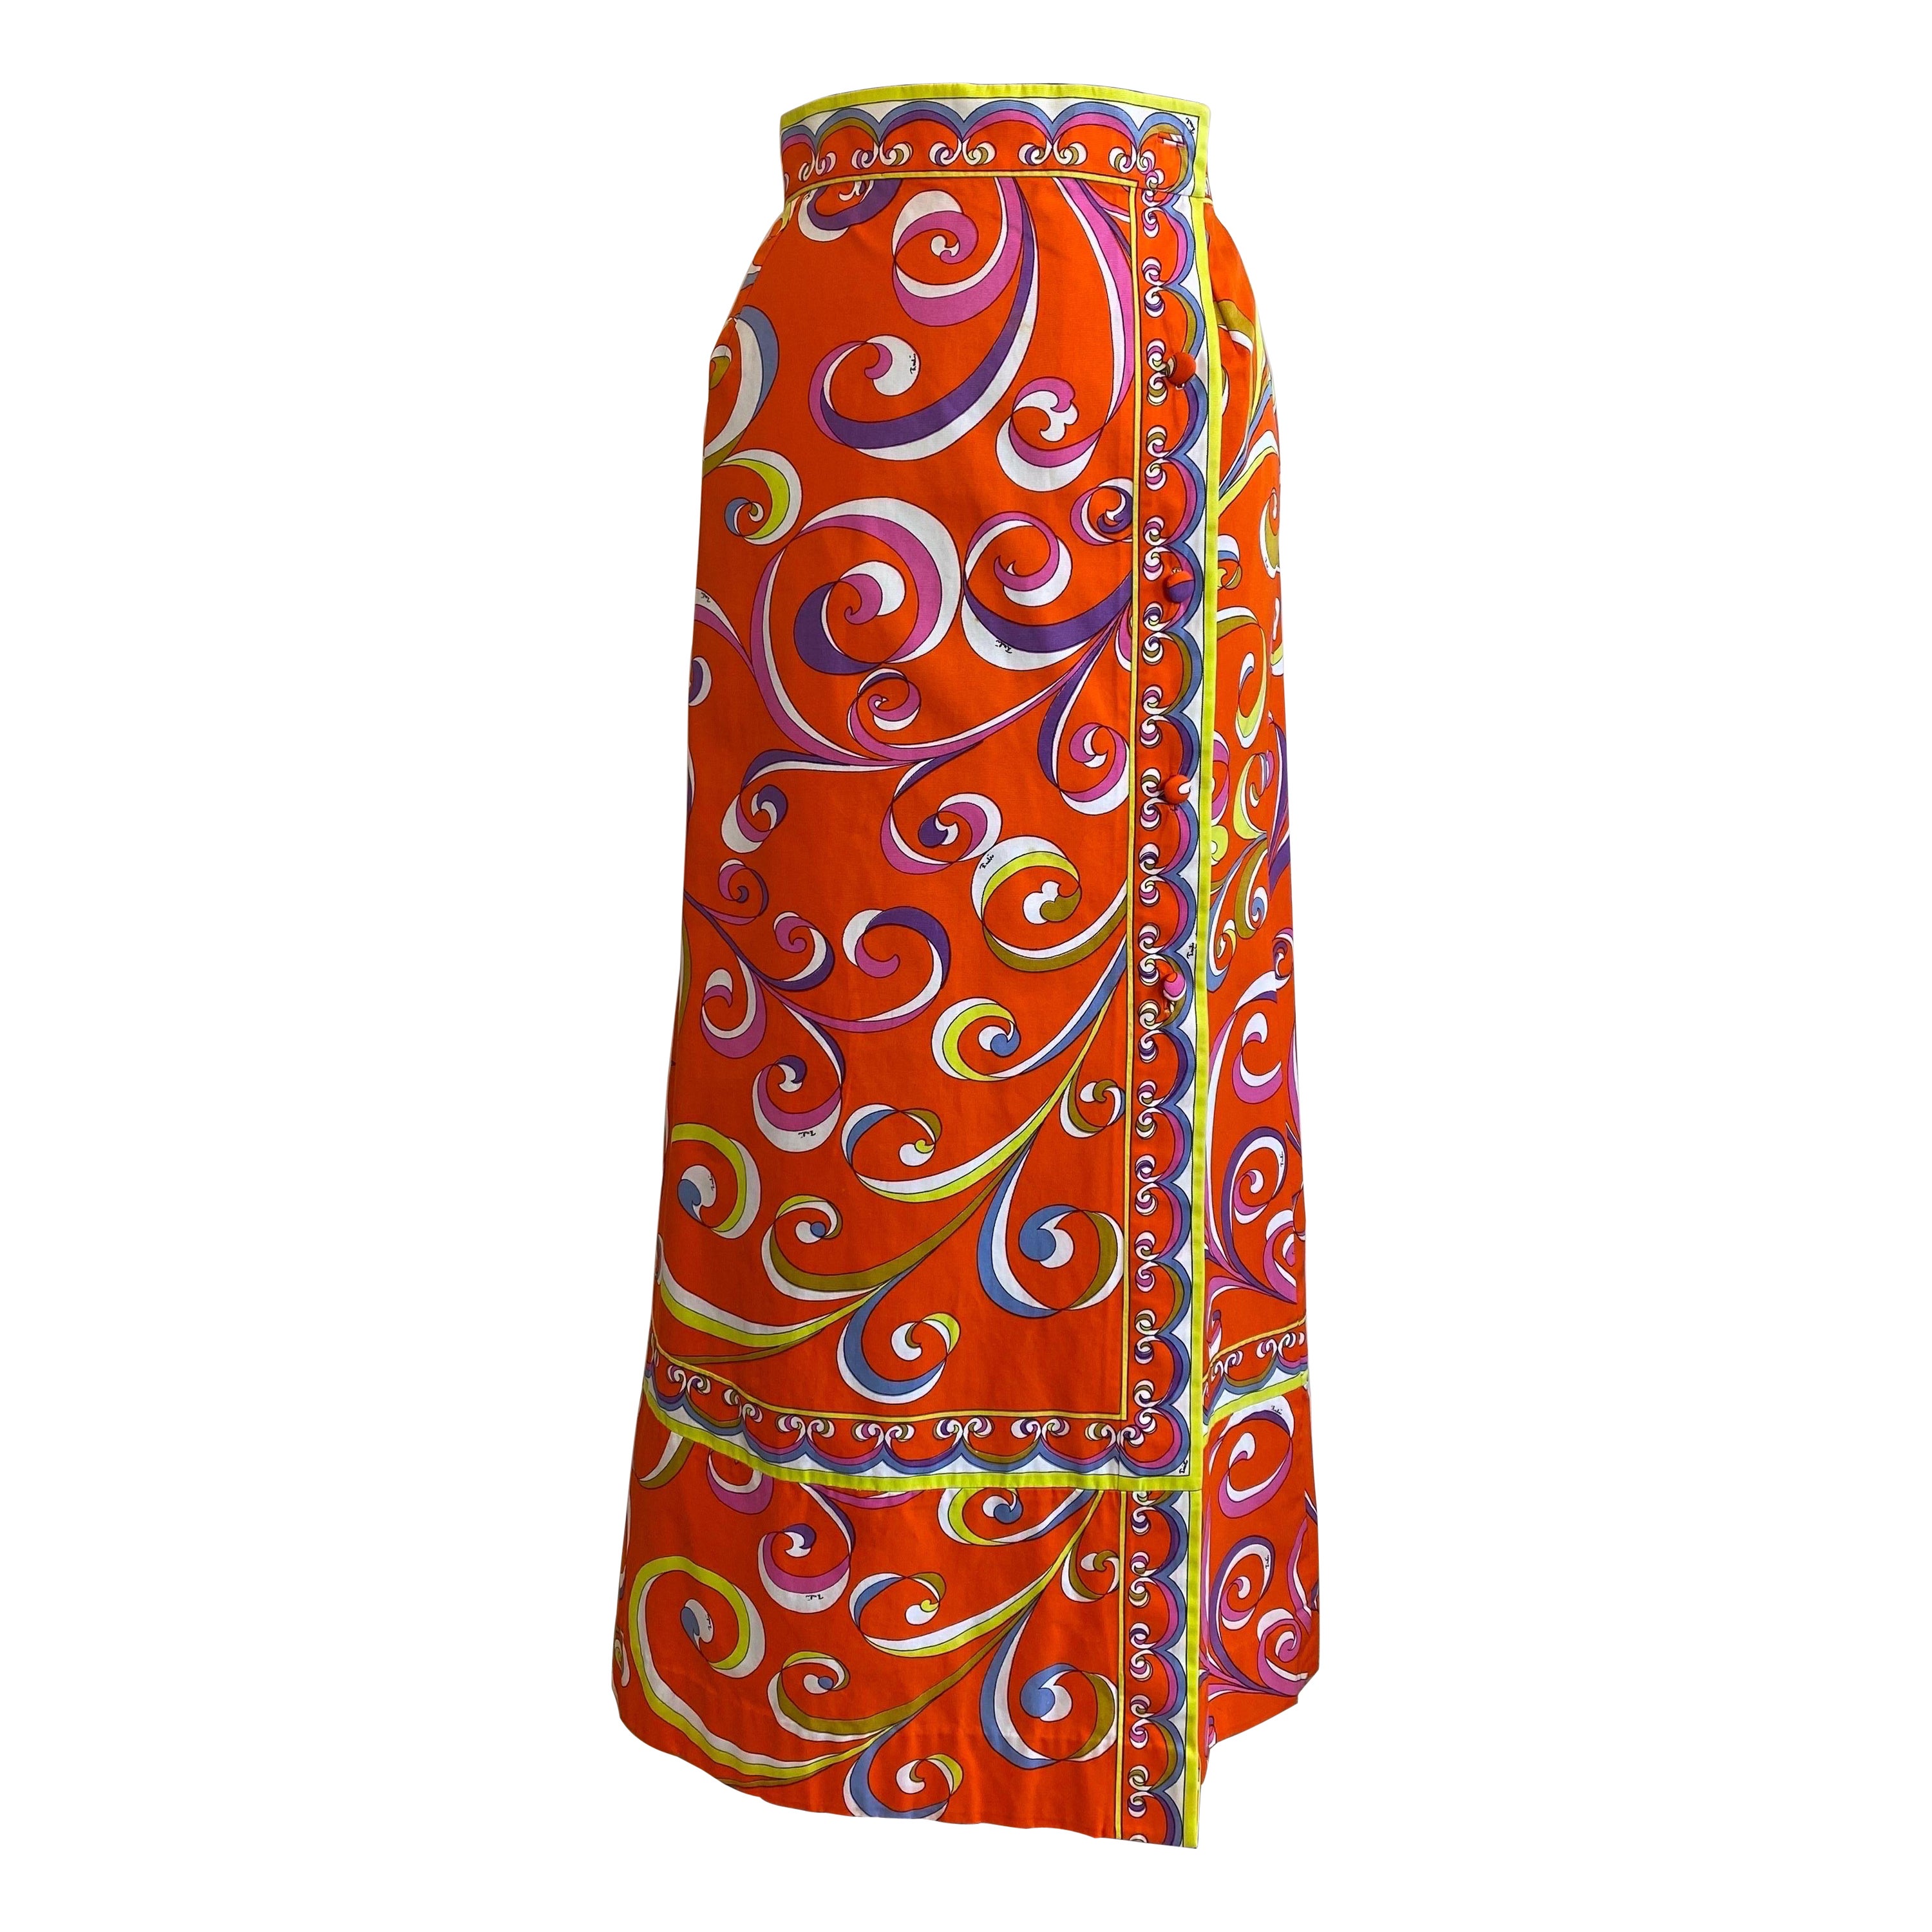 What skirts were popular in the 70s?